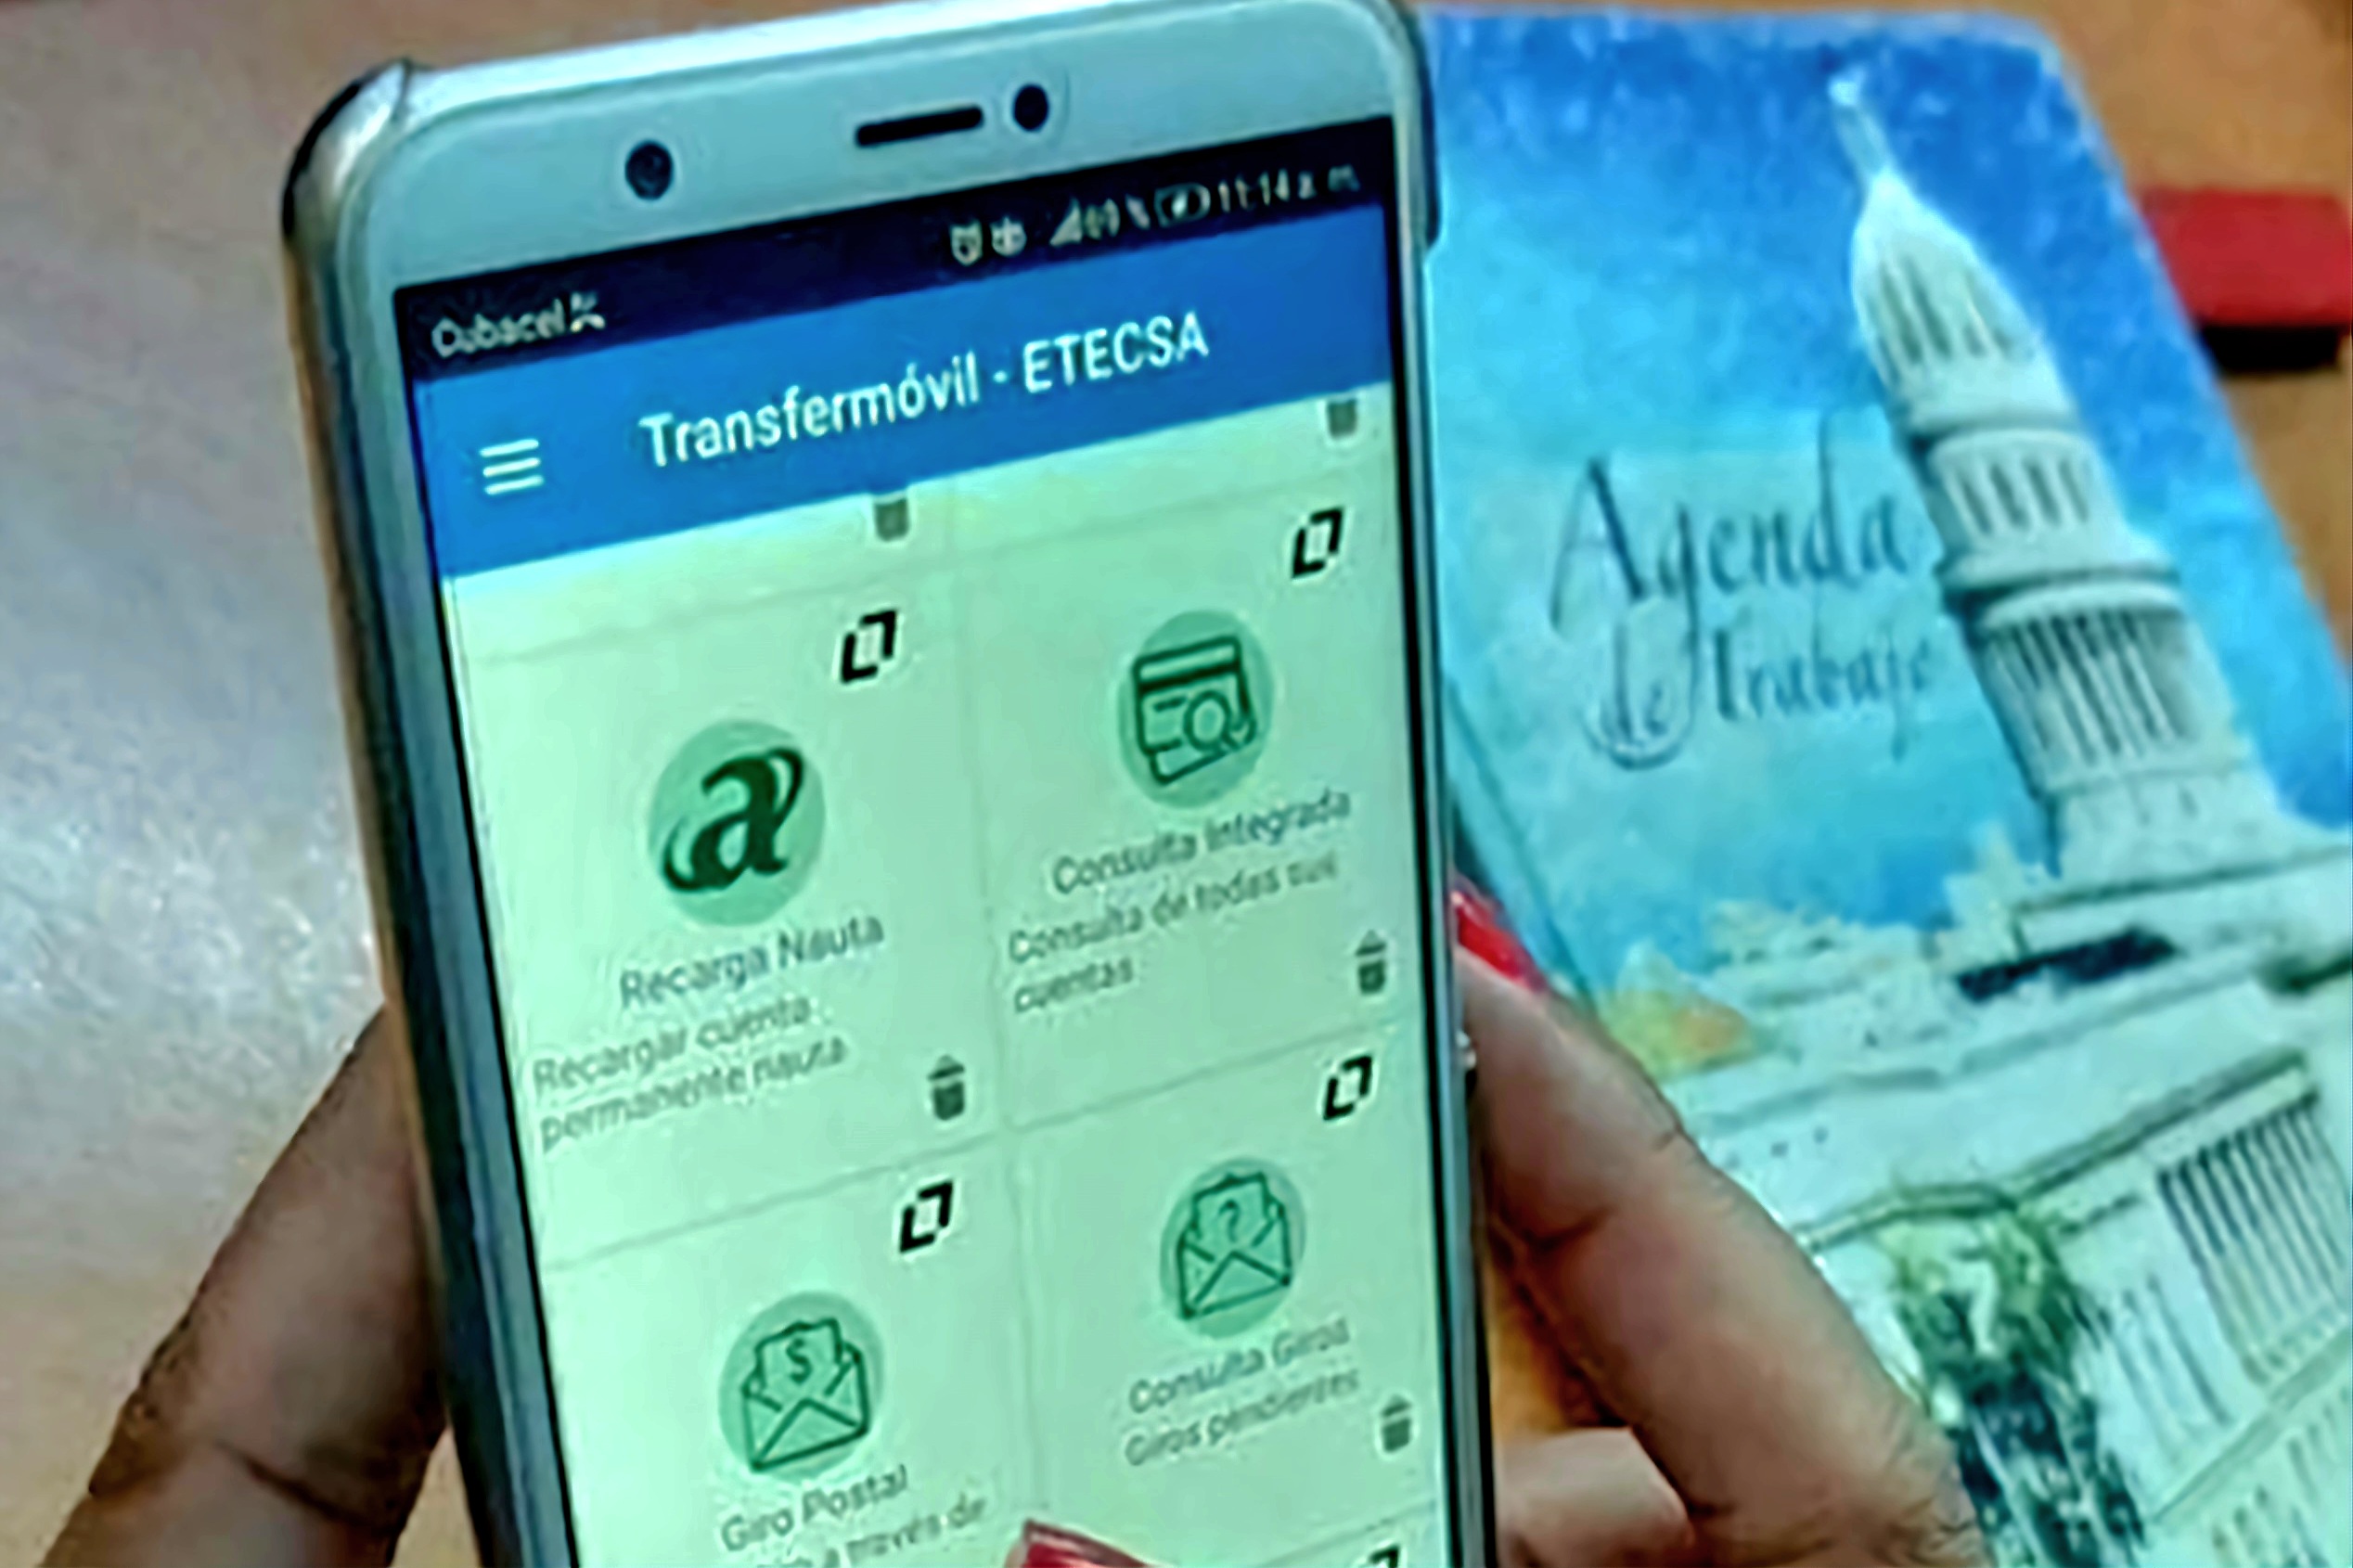 Transfermóvil increases its operations and achieves a record number in Cuba